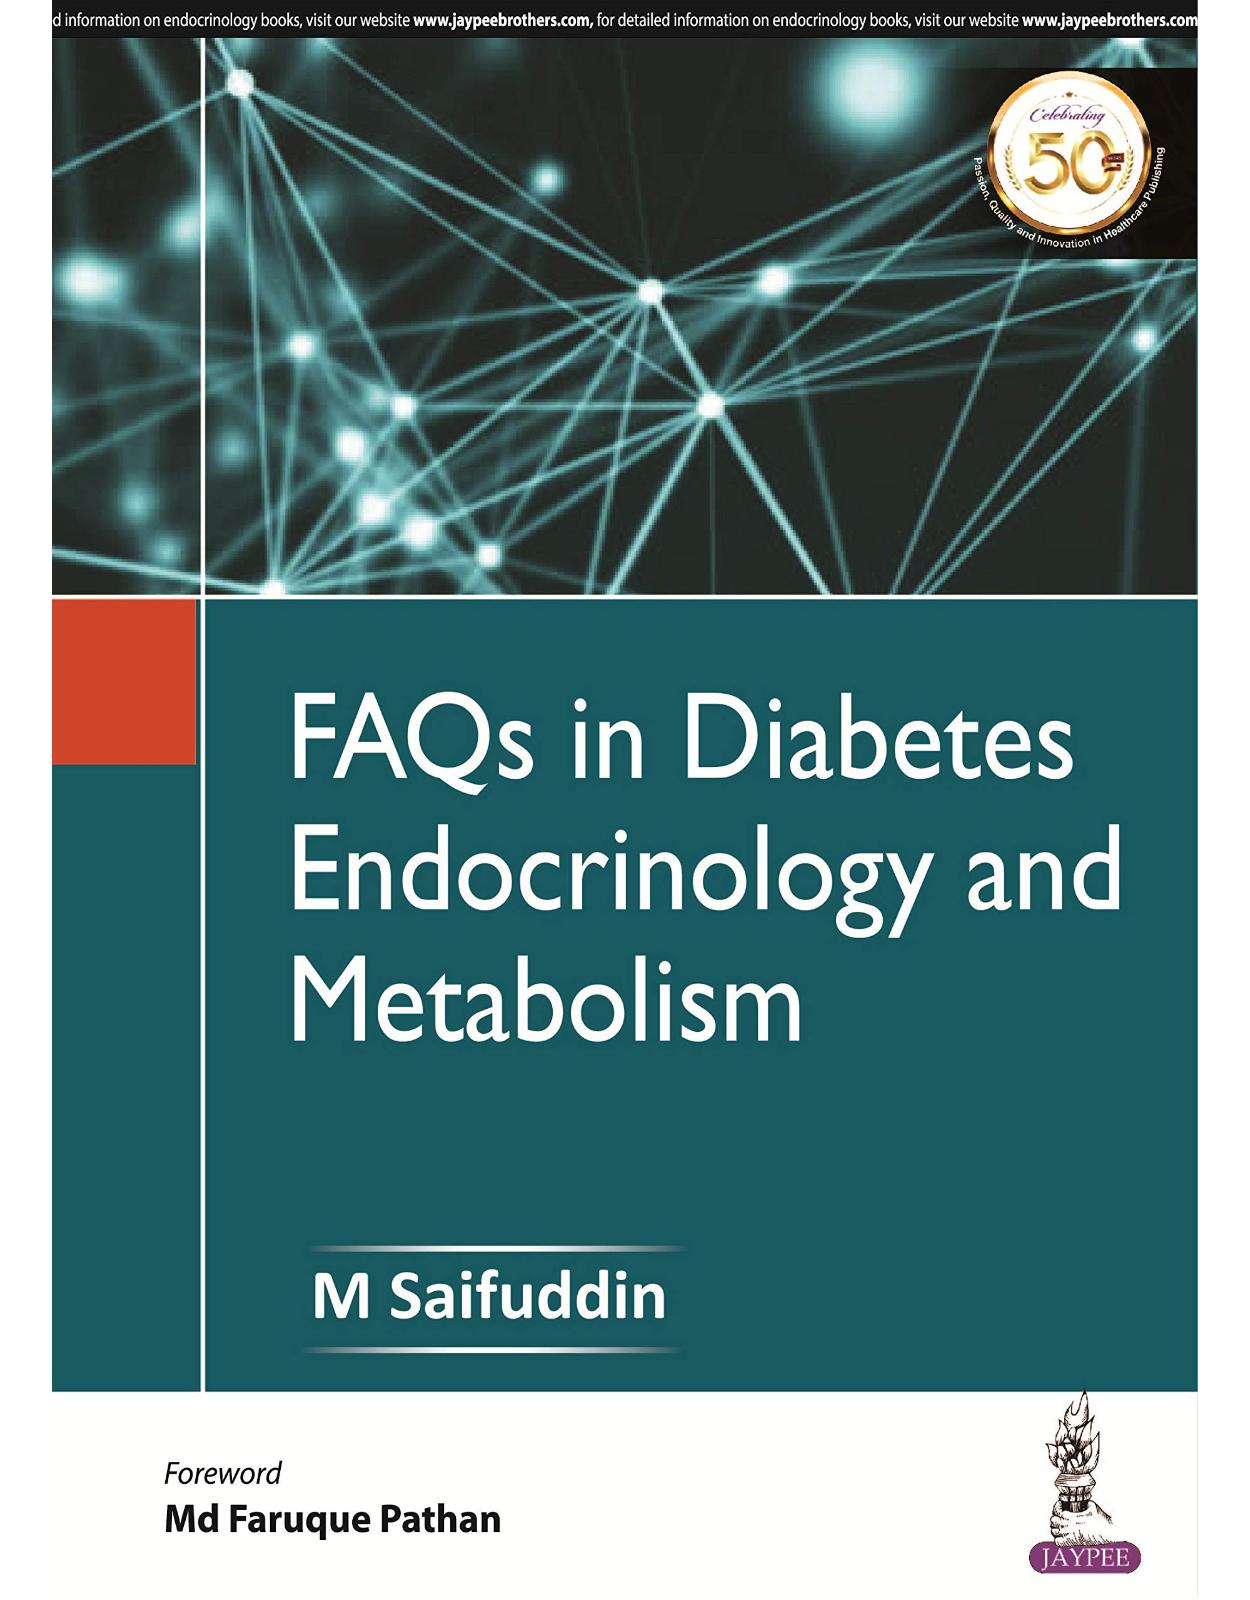 FAQs In Diabetes, Endocrinology and Metabolism